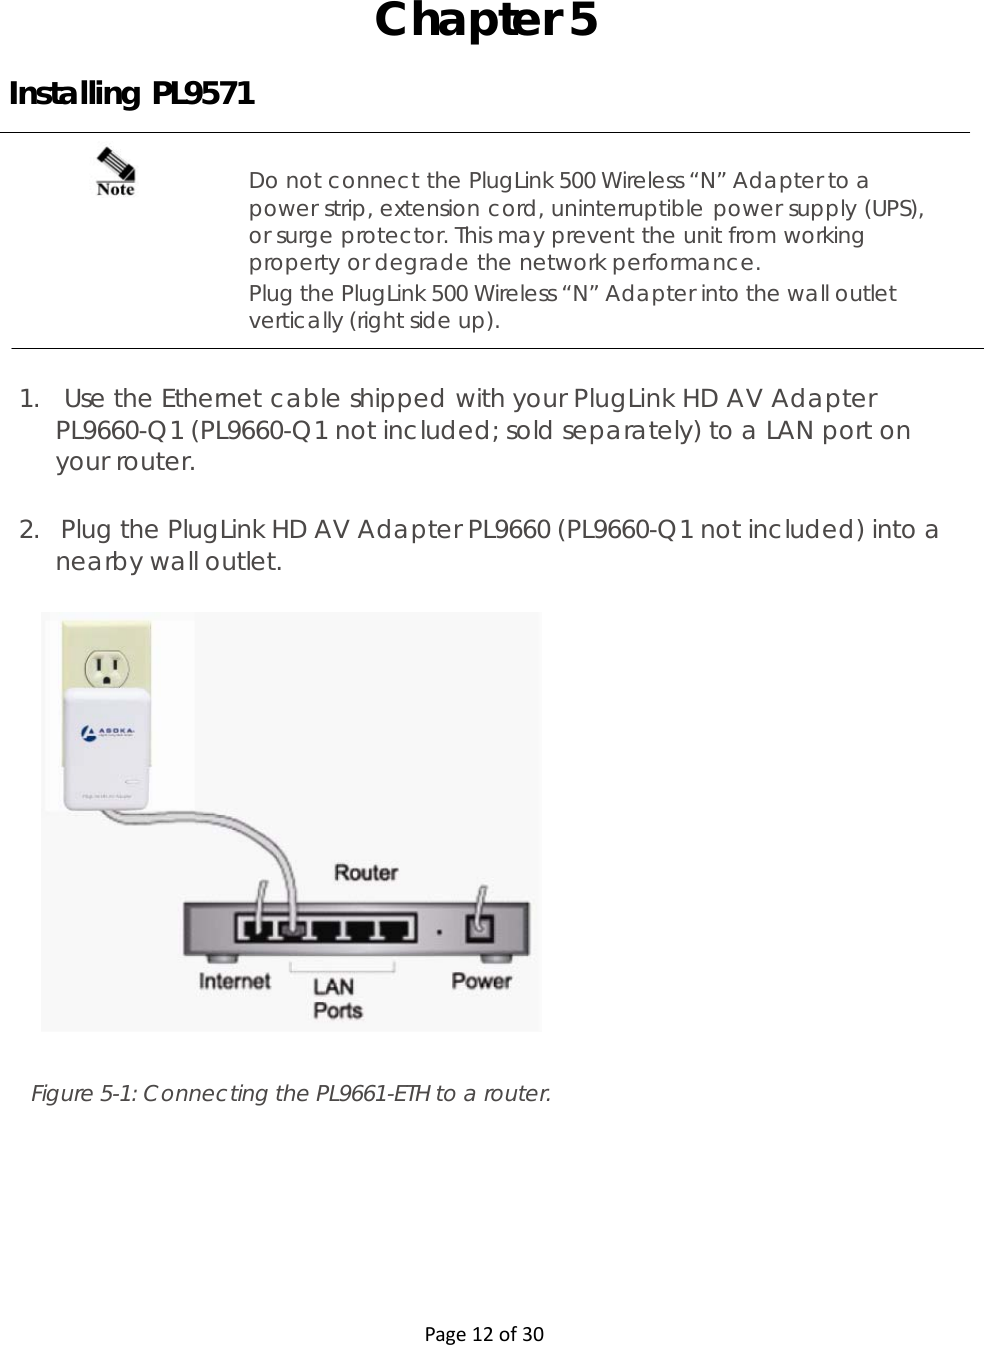  Page12of30  Chapter 5 Installing PL9571 Do not connect the PlugLink 500 Wireless “N” Adapter to a power strip, extension cord, uninterruptible power supply (UPS), or surge protector. This may prevent the unit from working property or degrade the network performance. Plug the PlugLink 500 Wireless “N” Adapter into the wall outlet vertically (right side up).   1.   Use the Ethernet cable shipped with your PlugLink HD AV Adapter PL9660-Q1 (PL9660-Q1 not included; sold separately) to a LAN port on your router.   2.   Plug the PlugLink HD AV Adapter PL9660 (PL9660-Q1 not included) into a nearby wall outlet.                         Figure 5-1: Connecting the PL9661-ETH to a router.   